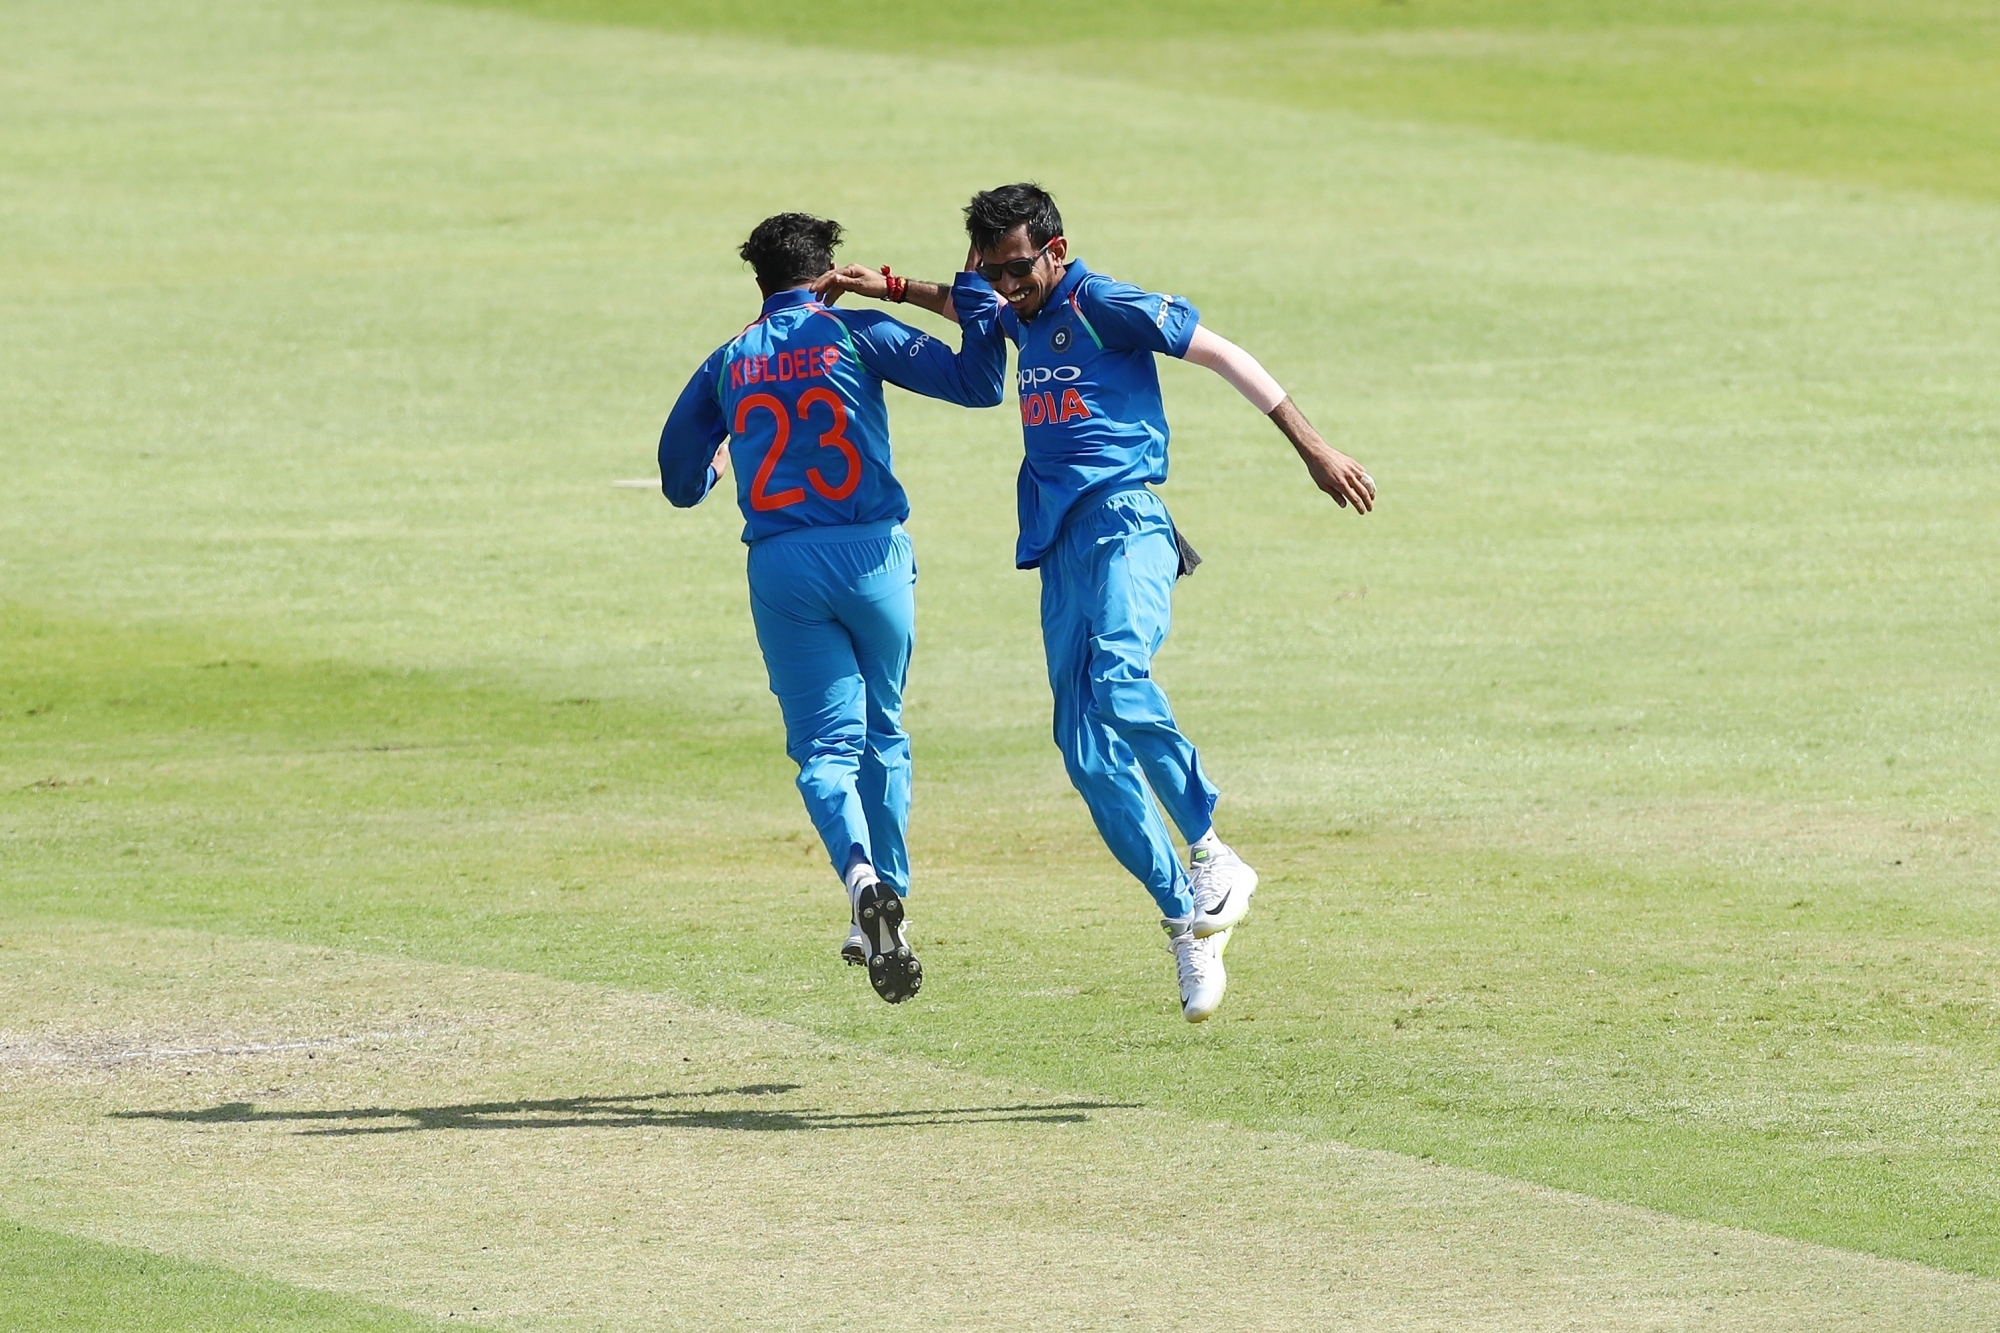 Kuldeep, Chahal could be the X-factor in 2019 World Cup: Kohli